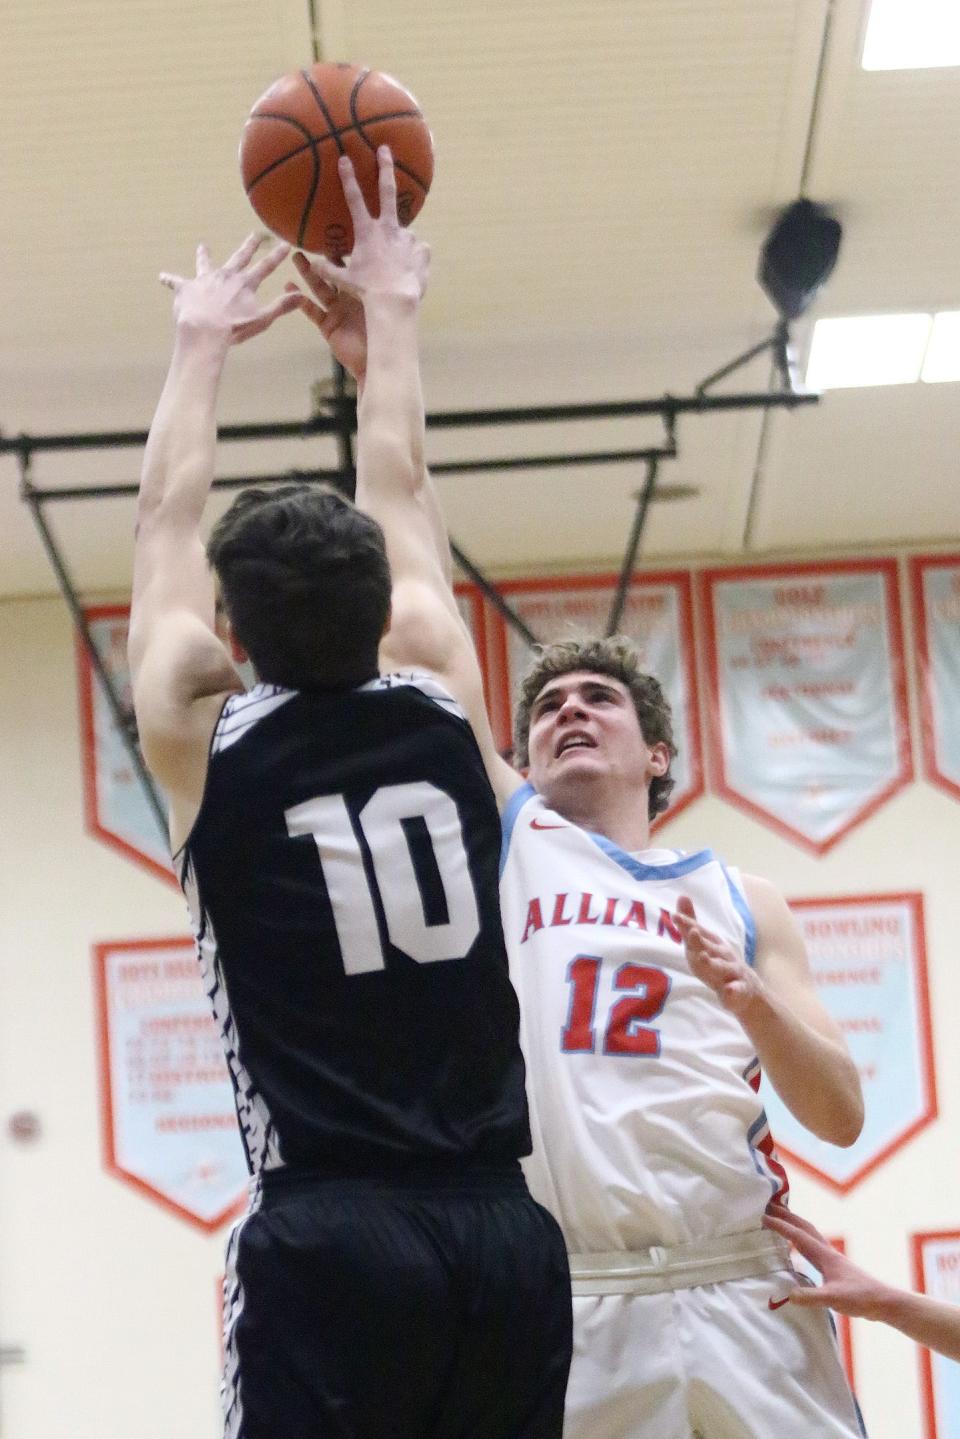 Alliance's Brendan Zurbrugg (12) puts up a shot over Carrollton defender Luke Allison during conference action at Alliance High School on Tuesday.